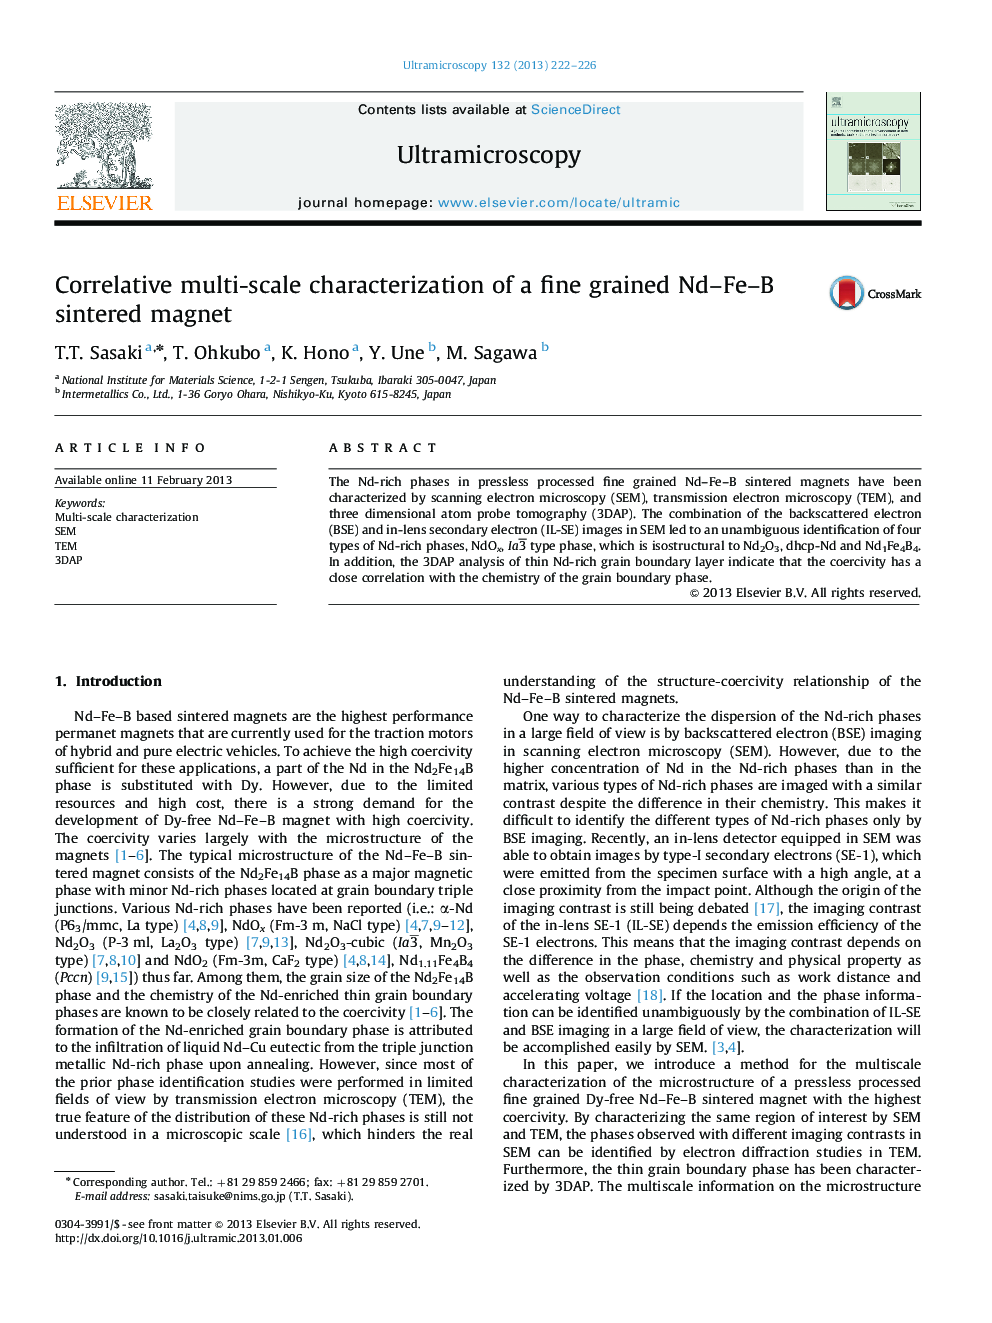 Correlative multi-scale characterization of a fine grained Nd–Fe–B sintered magnet